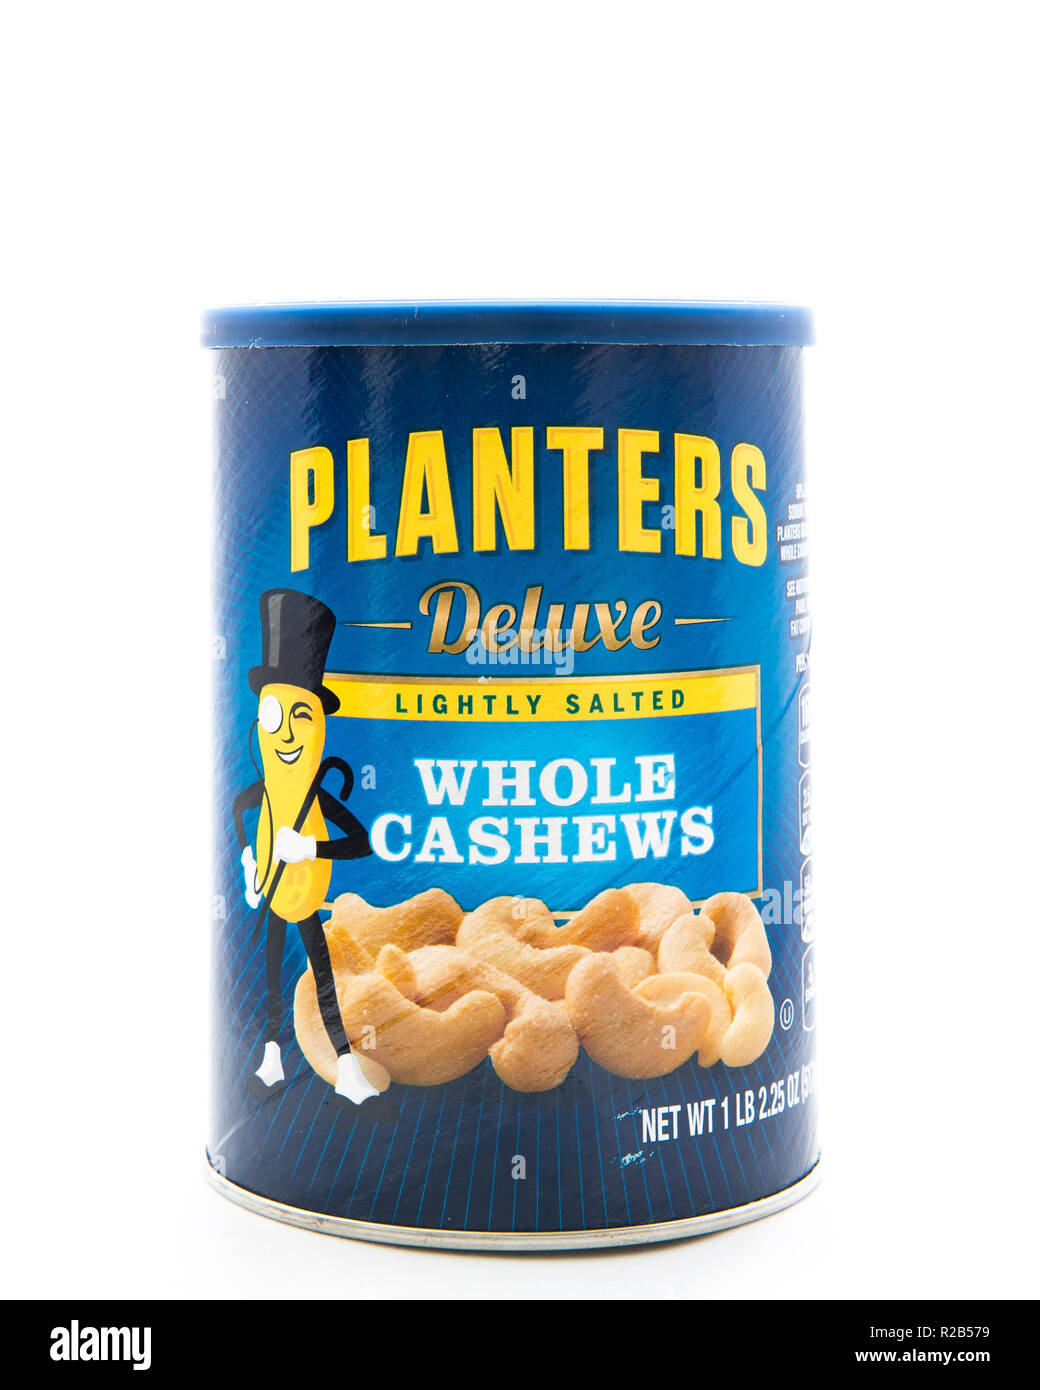 A can of Planters Deluxe lightly salted and roasted whole cashews Stock Photo